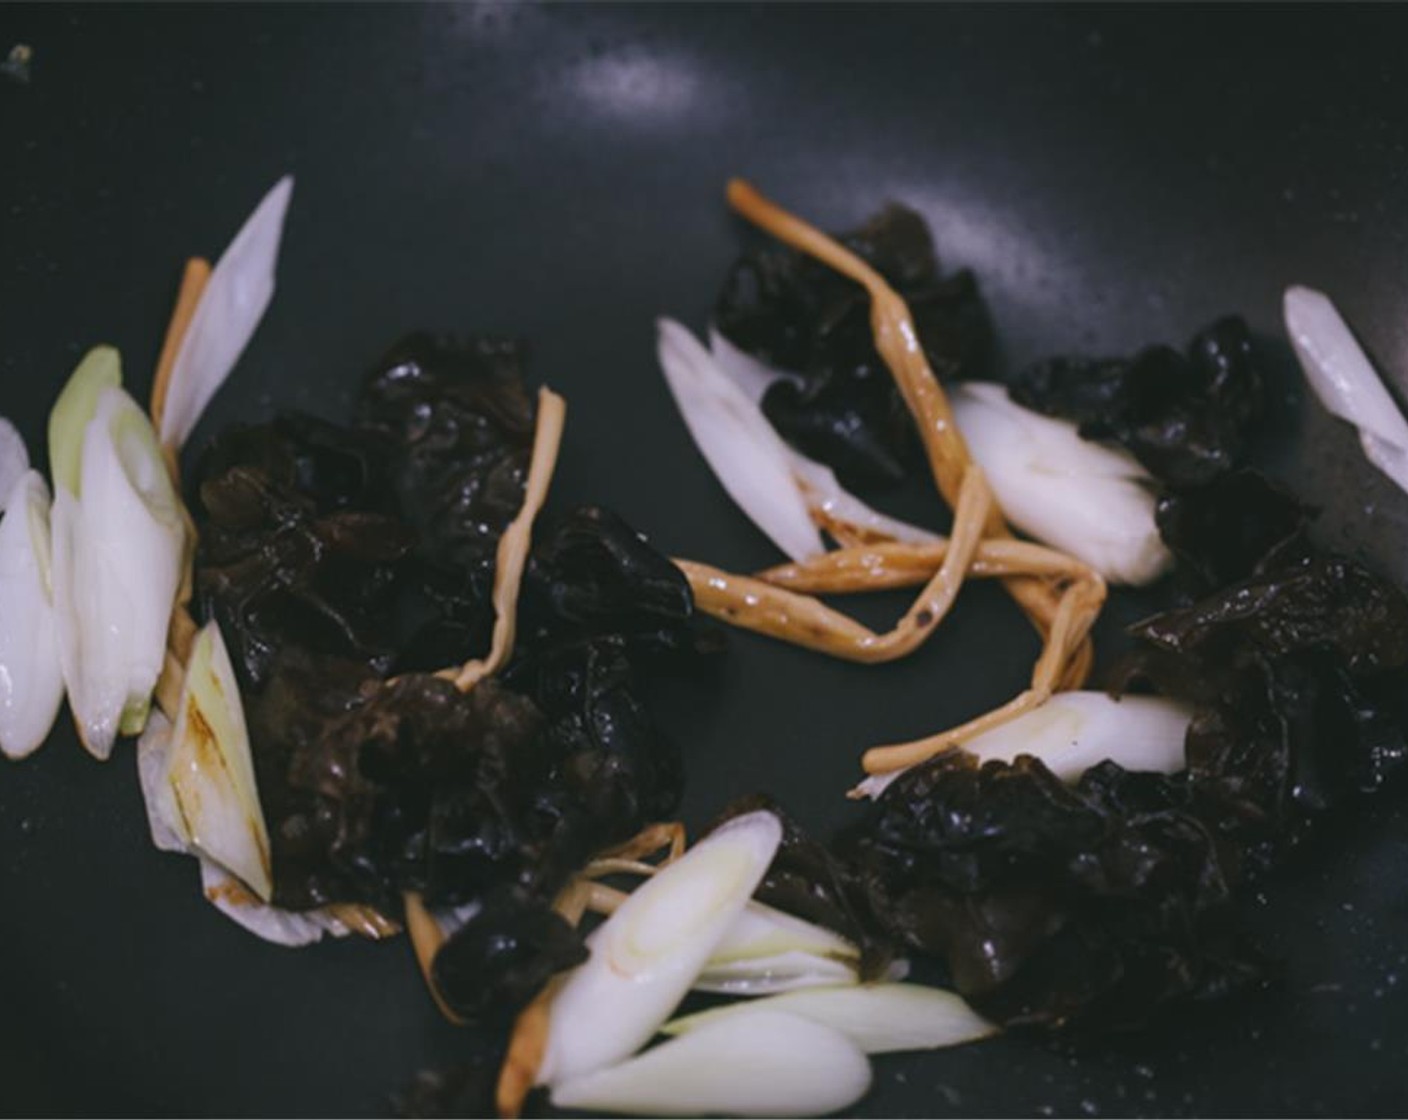 step 6 Leave around 1 tablespoon of oil in the wok and then fry the Garlic (1 clove) until fragrant, place prepared Wood Ear Mushrooms (1 handful), Daylily (1 bunch), and carrot. Continue frying for around 1 minute over medium heat.